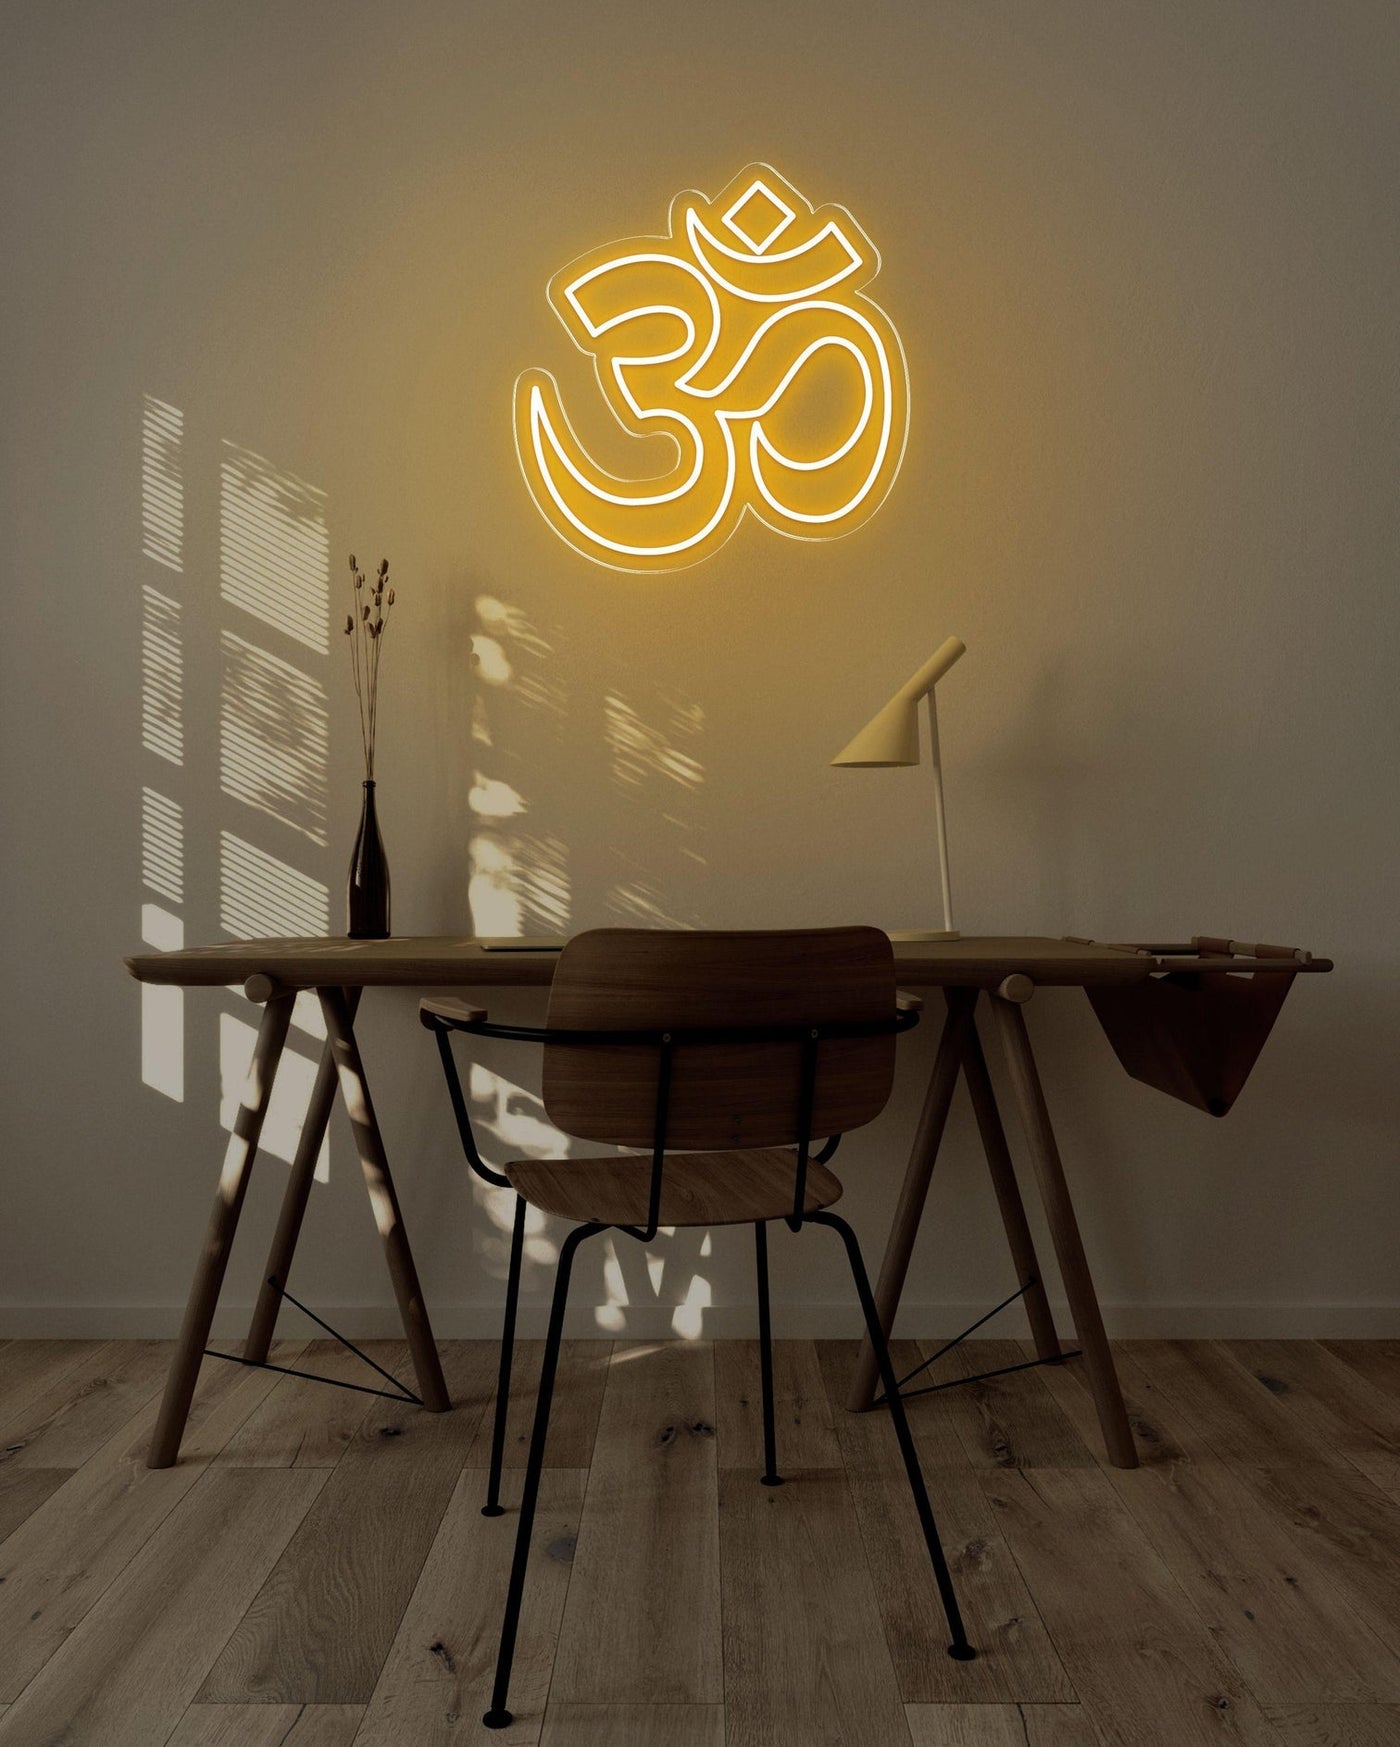 OM LED neon sign - 22inch x 22inchGold